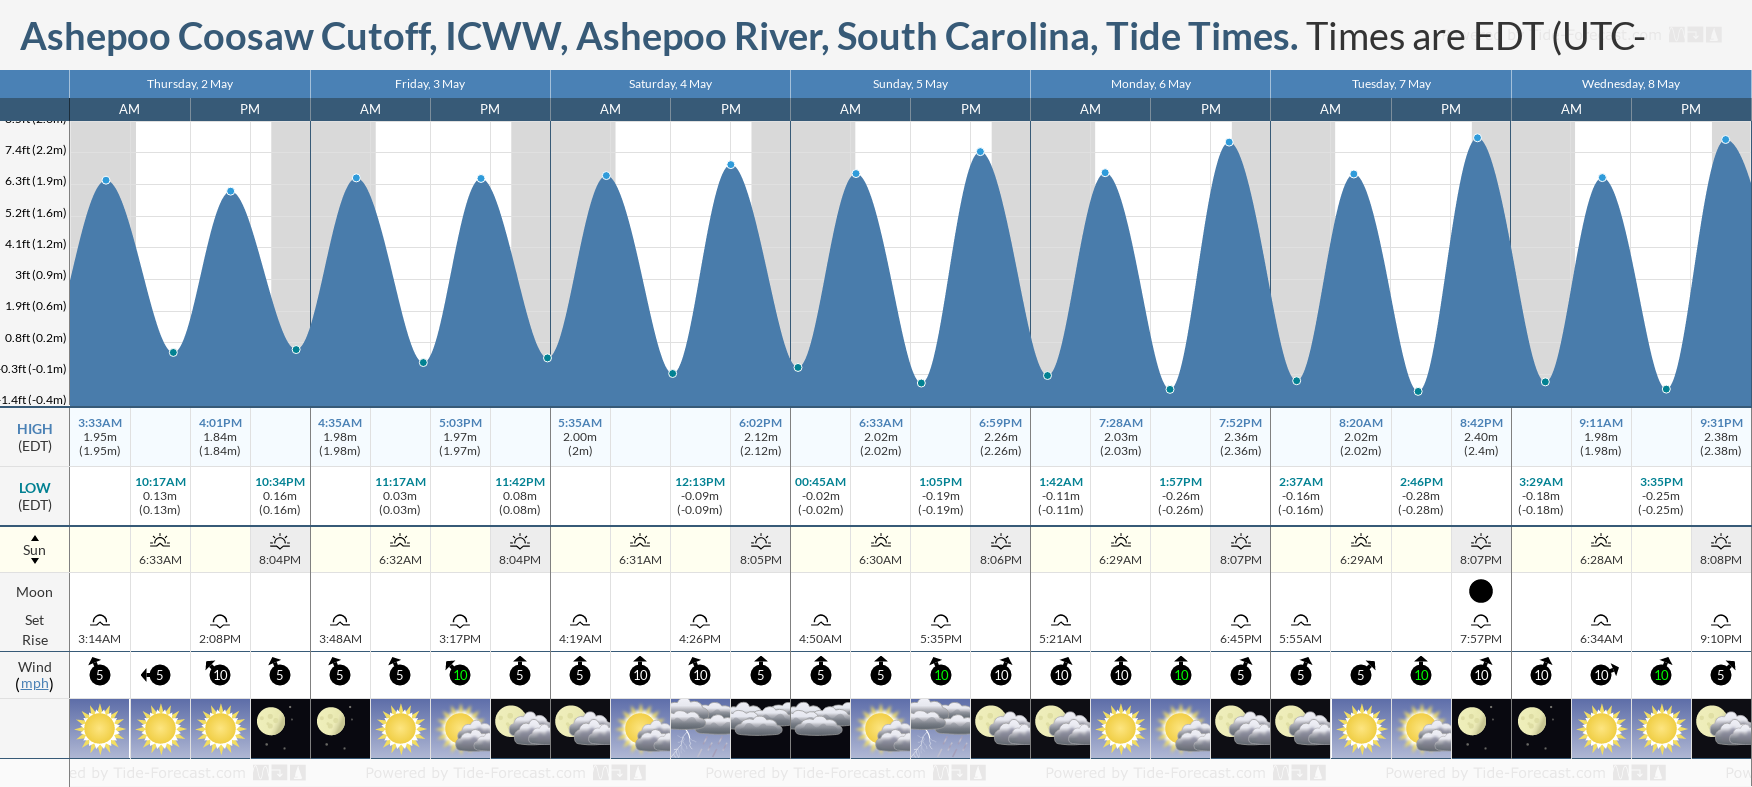 Ashepoo Coosaw Cutoff, ICWW, Ashepoo River, South Carolina Tide Chart including high and low tide tide times for the next 7 days